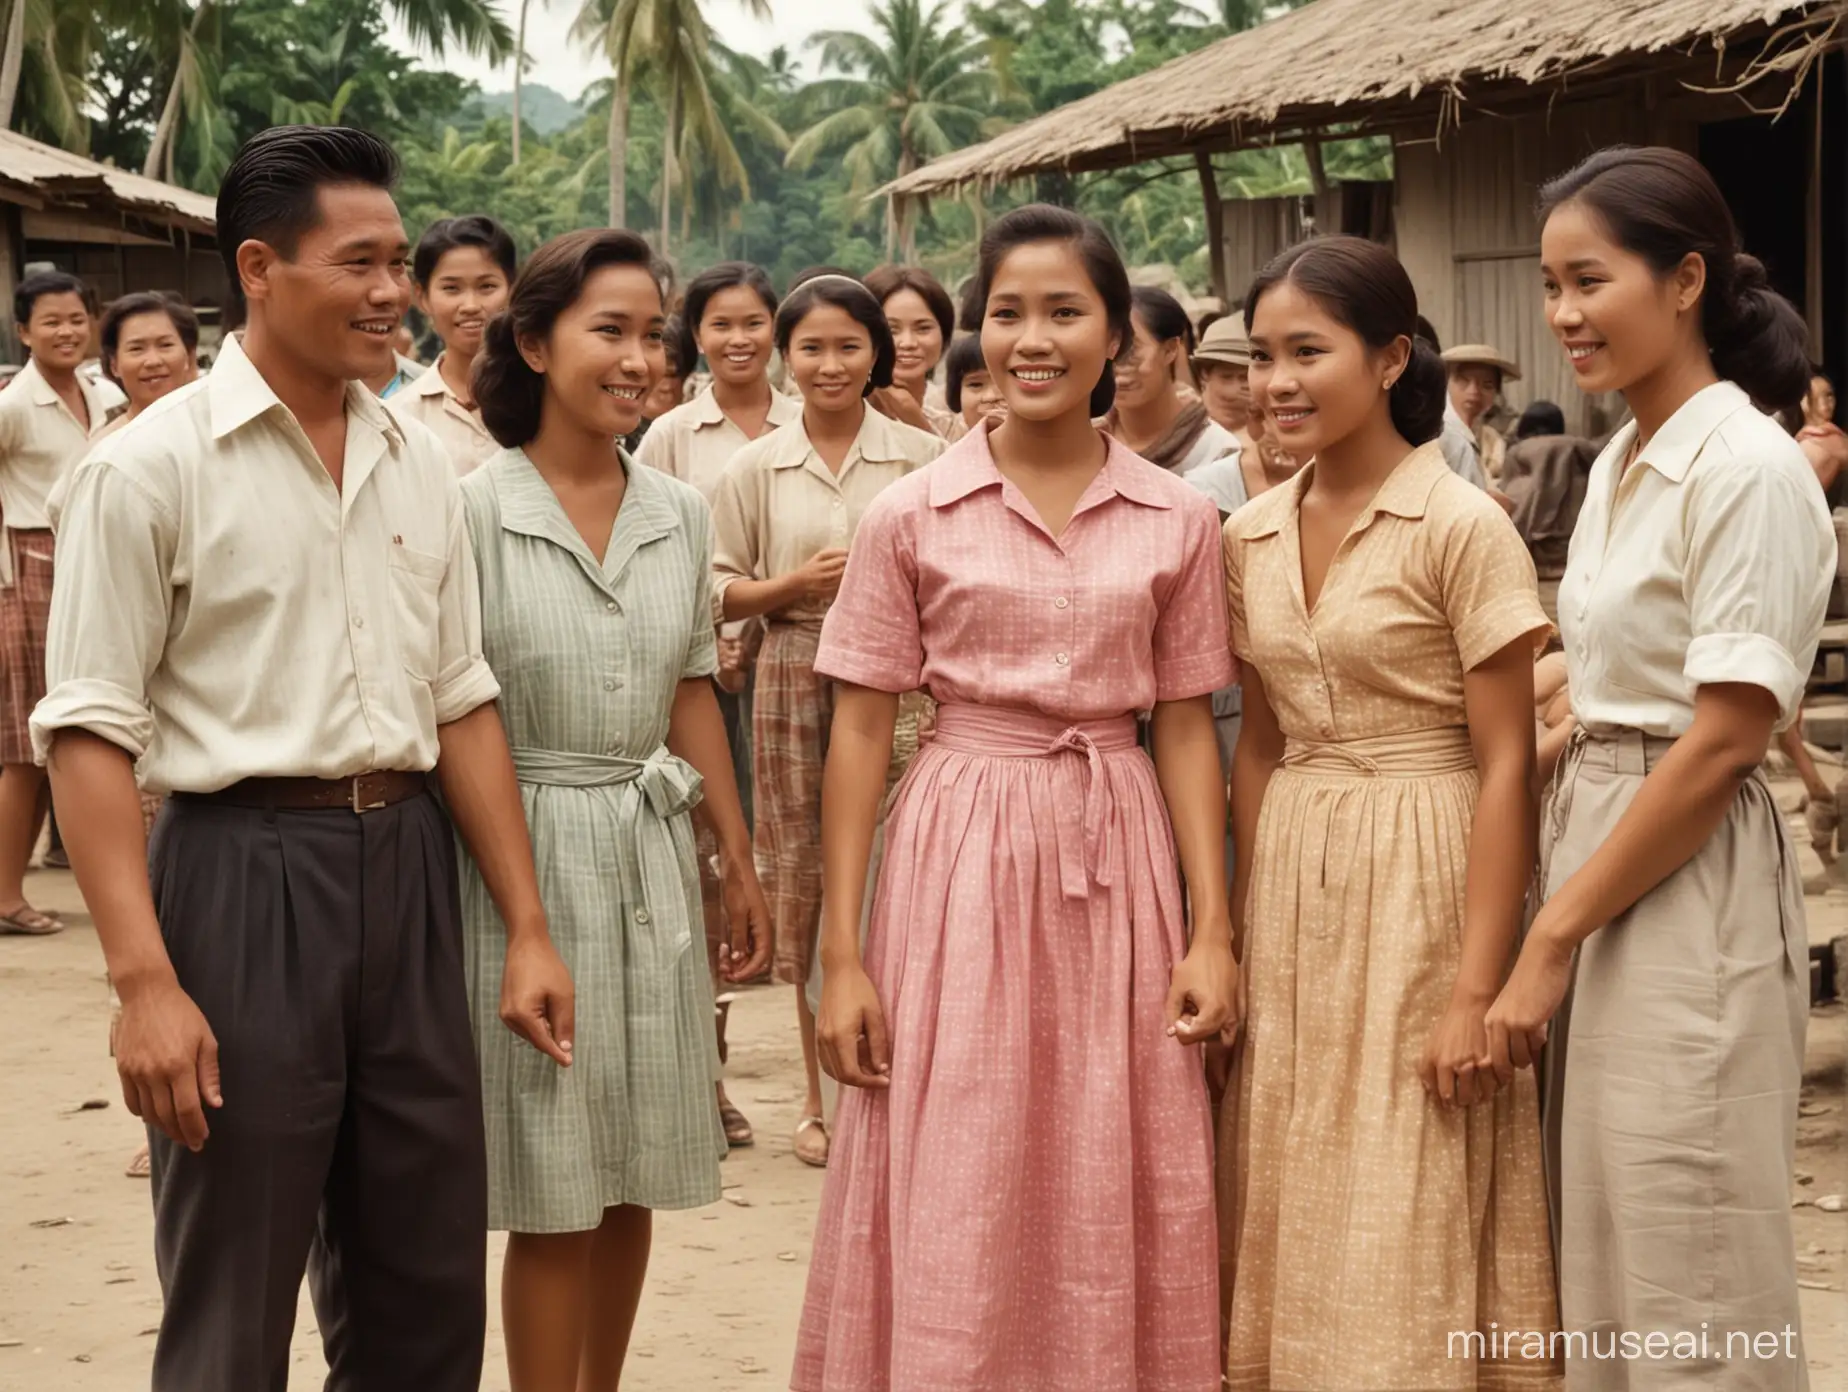 A young Filipina being invited to a rural village feast in the Philippines, she is accompanied by one female friend, they are greeted by middle-aged parents, some of the old neighbors are gawking suspiciously at them, colored 1950s era Philippines, cinematic,